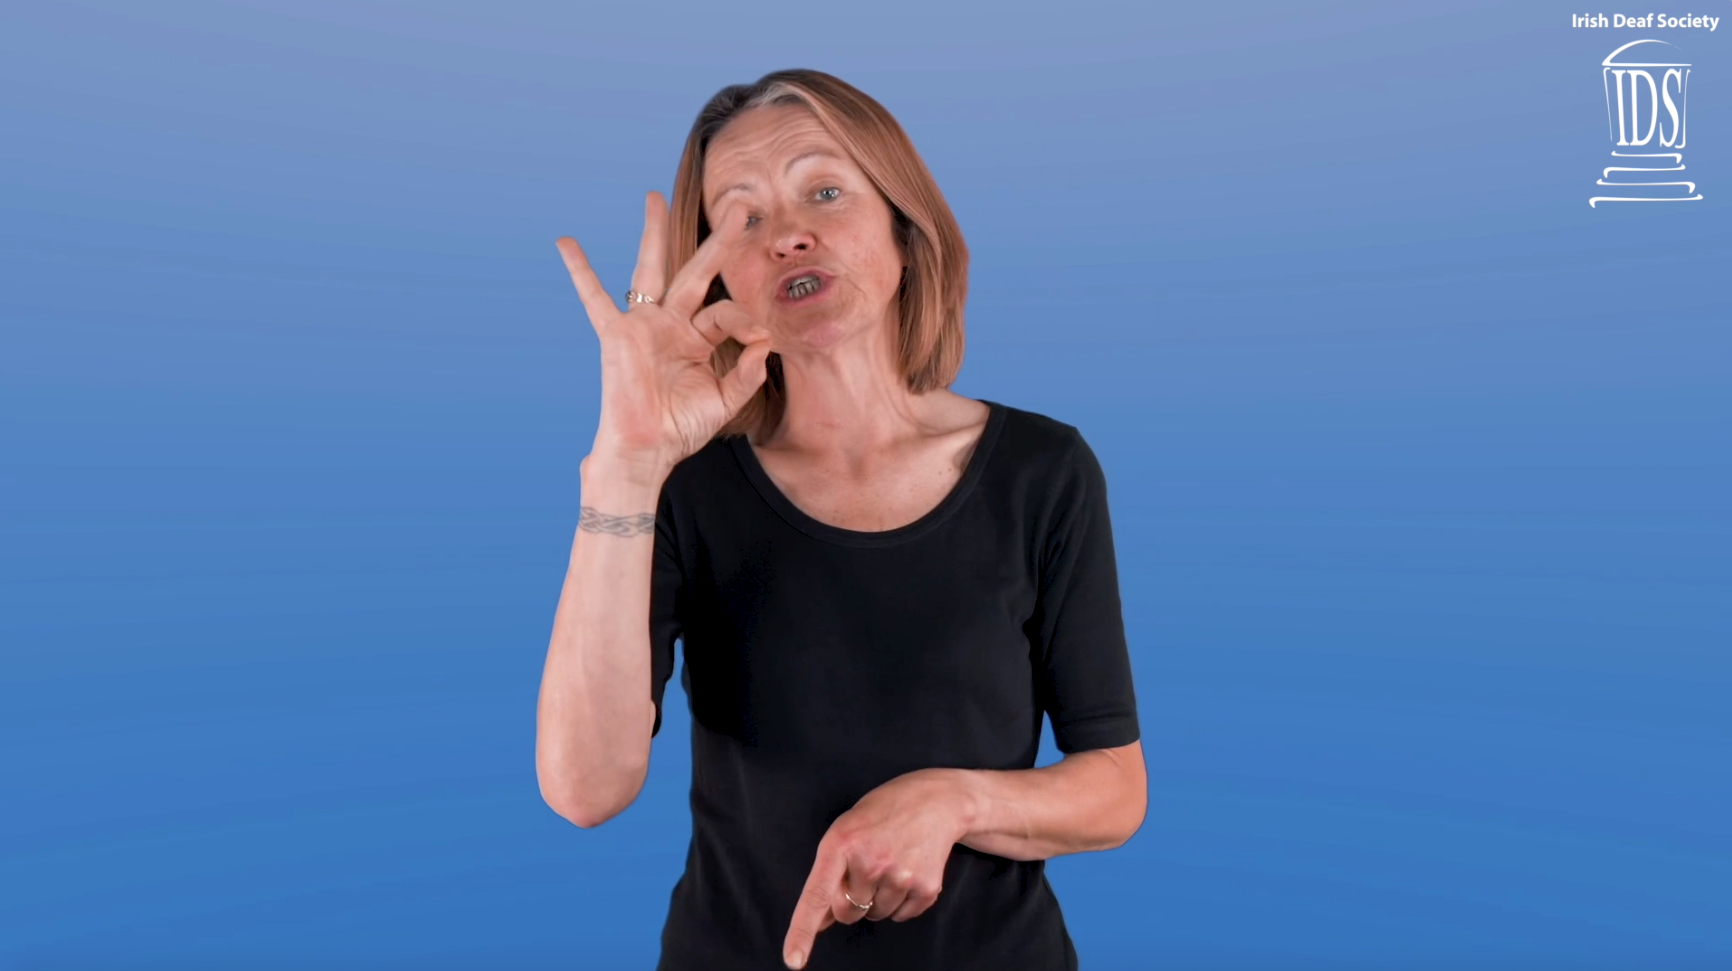 Mouthing & Mouth Gestures